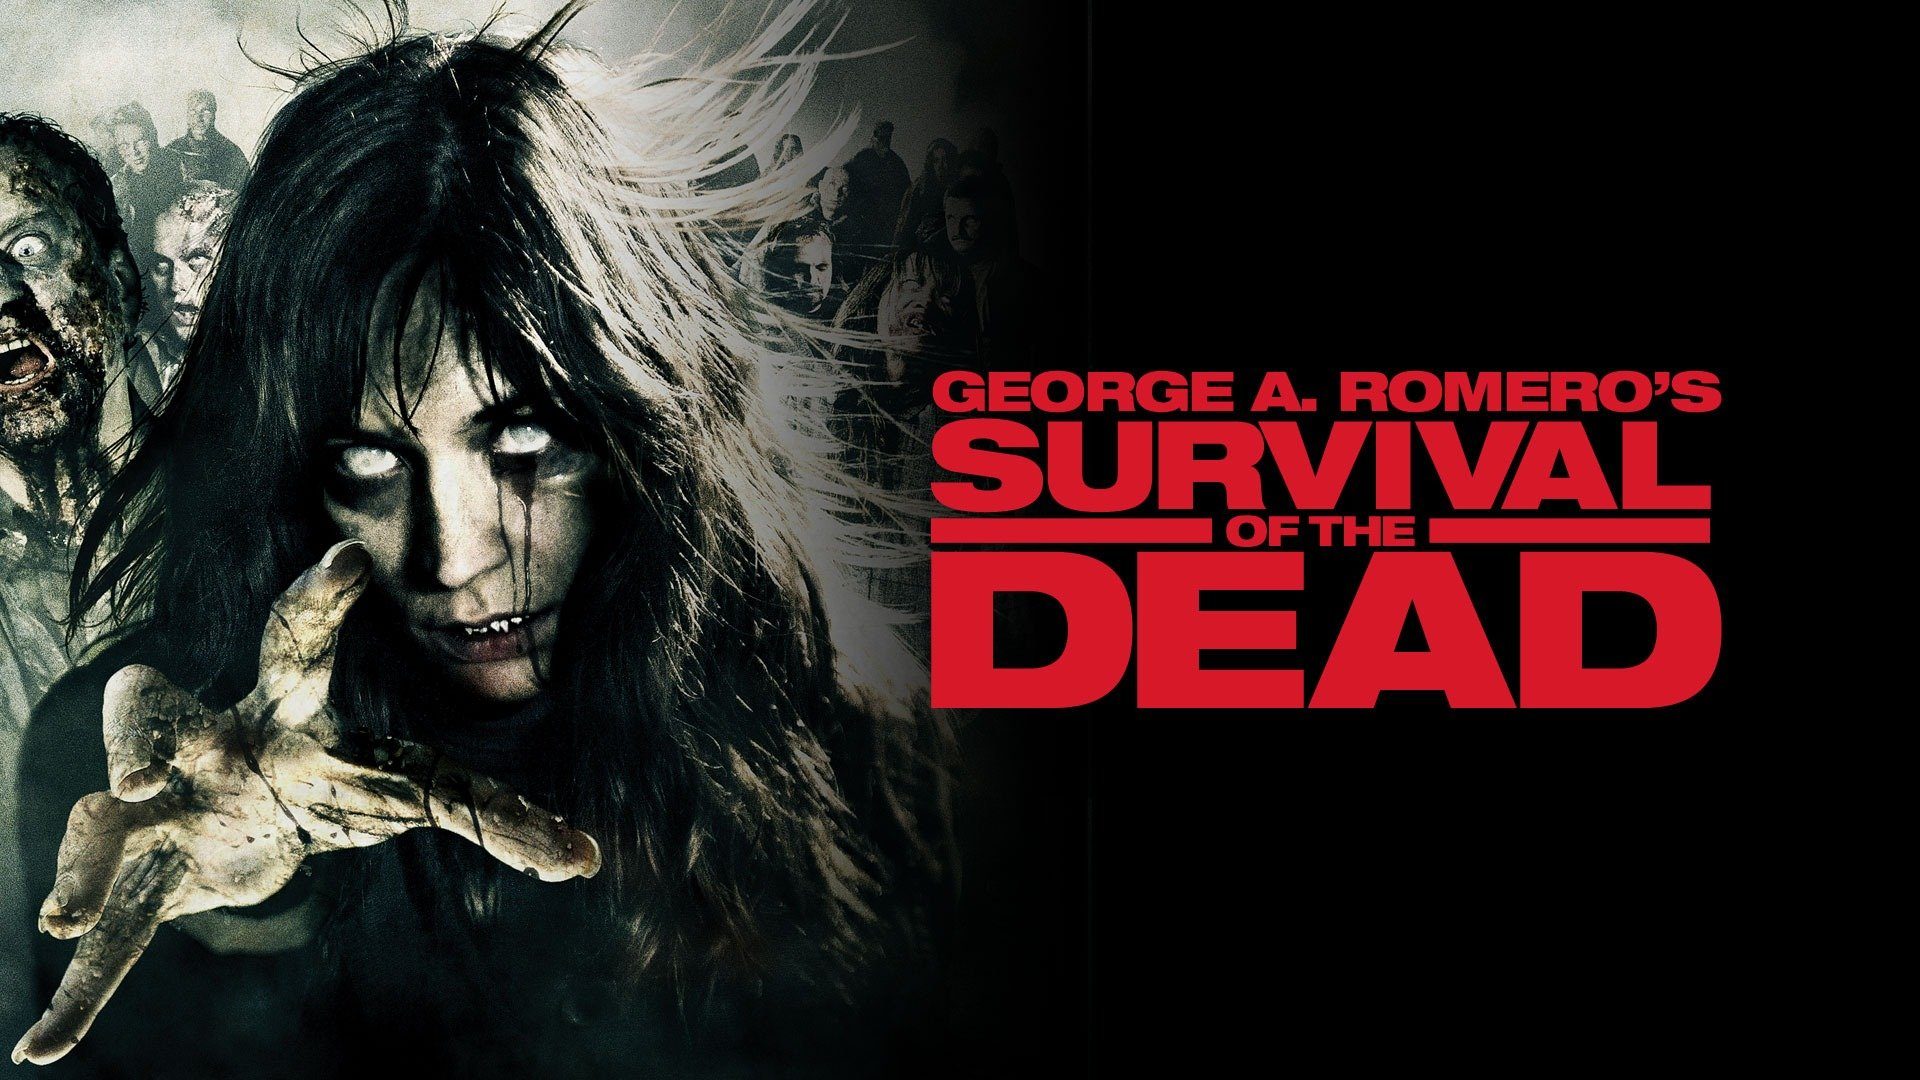 George A. Romero's Survival of the Dead: A Personal Reassessment